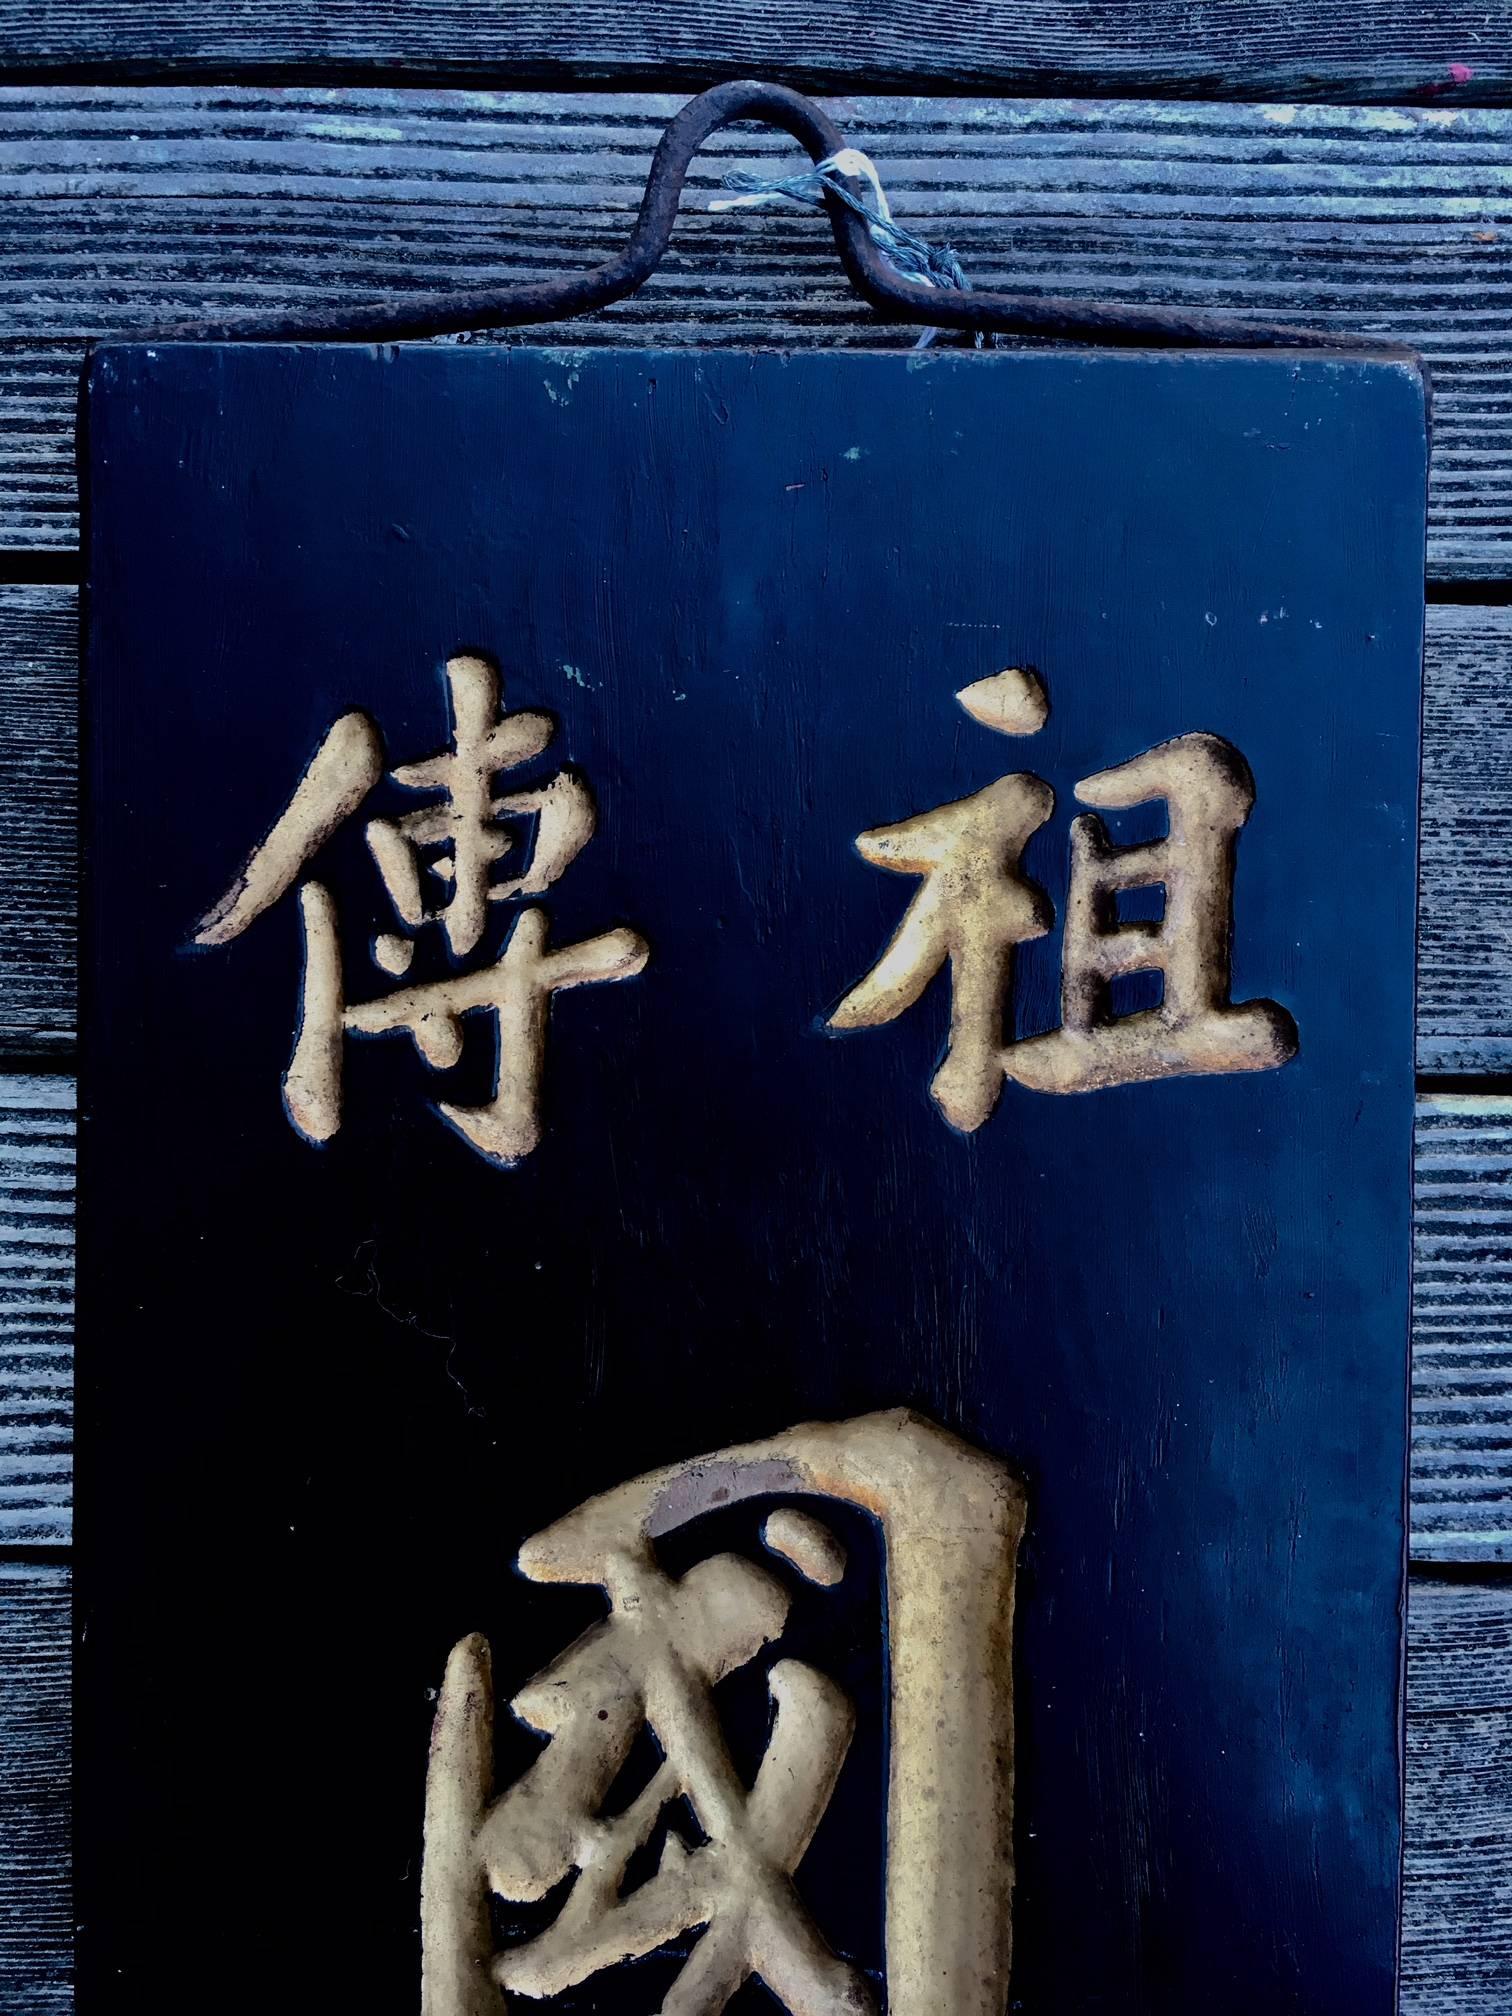 Antique Chinese traditional medicine trade sign, 19th century or earlier, a hand-carved and painted double-sided (front and back sides are shown in images) sign with deeply incised and gilded calligraphy on a black background, indicating the